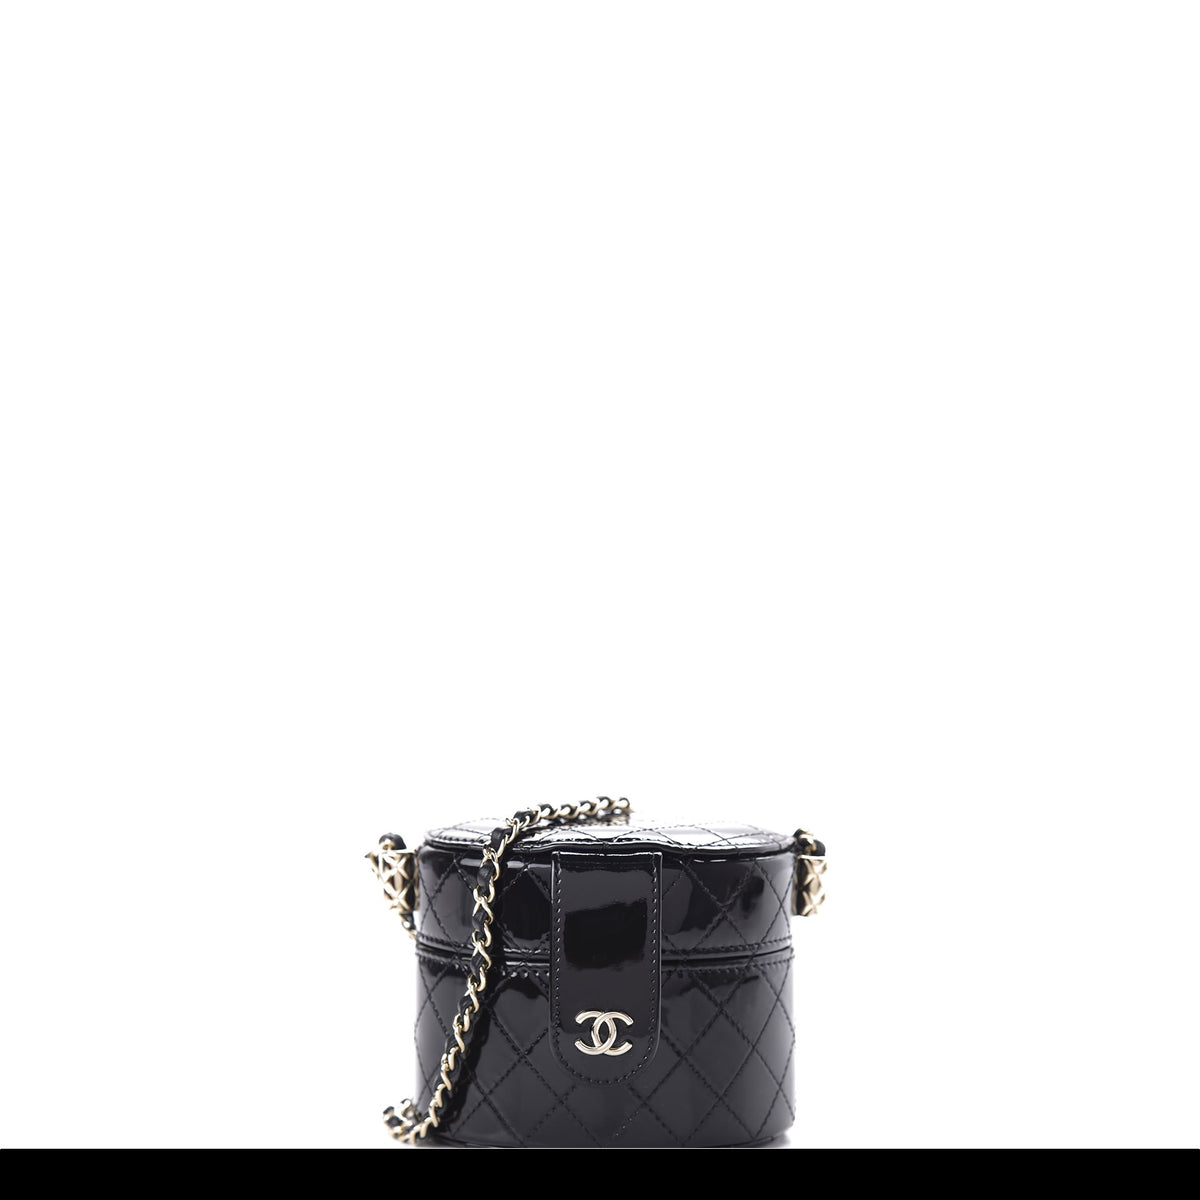 Chanel Micro Mini Black Quilted Patent Leather Jewelry Box